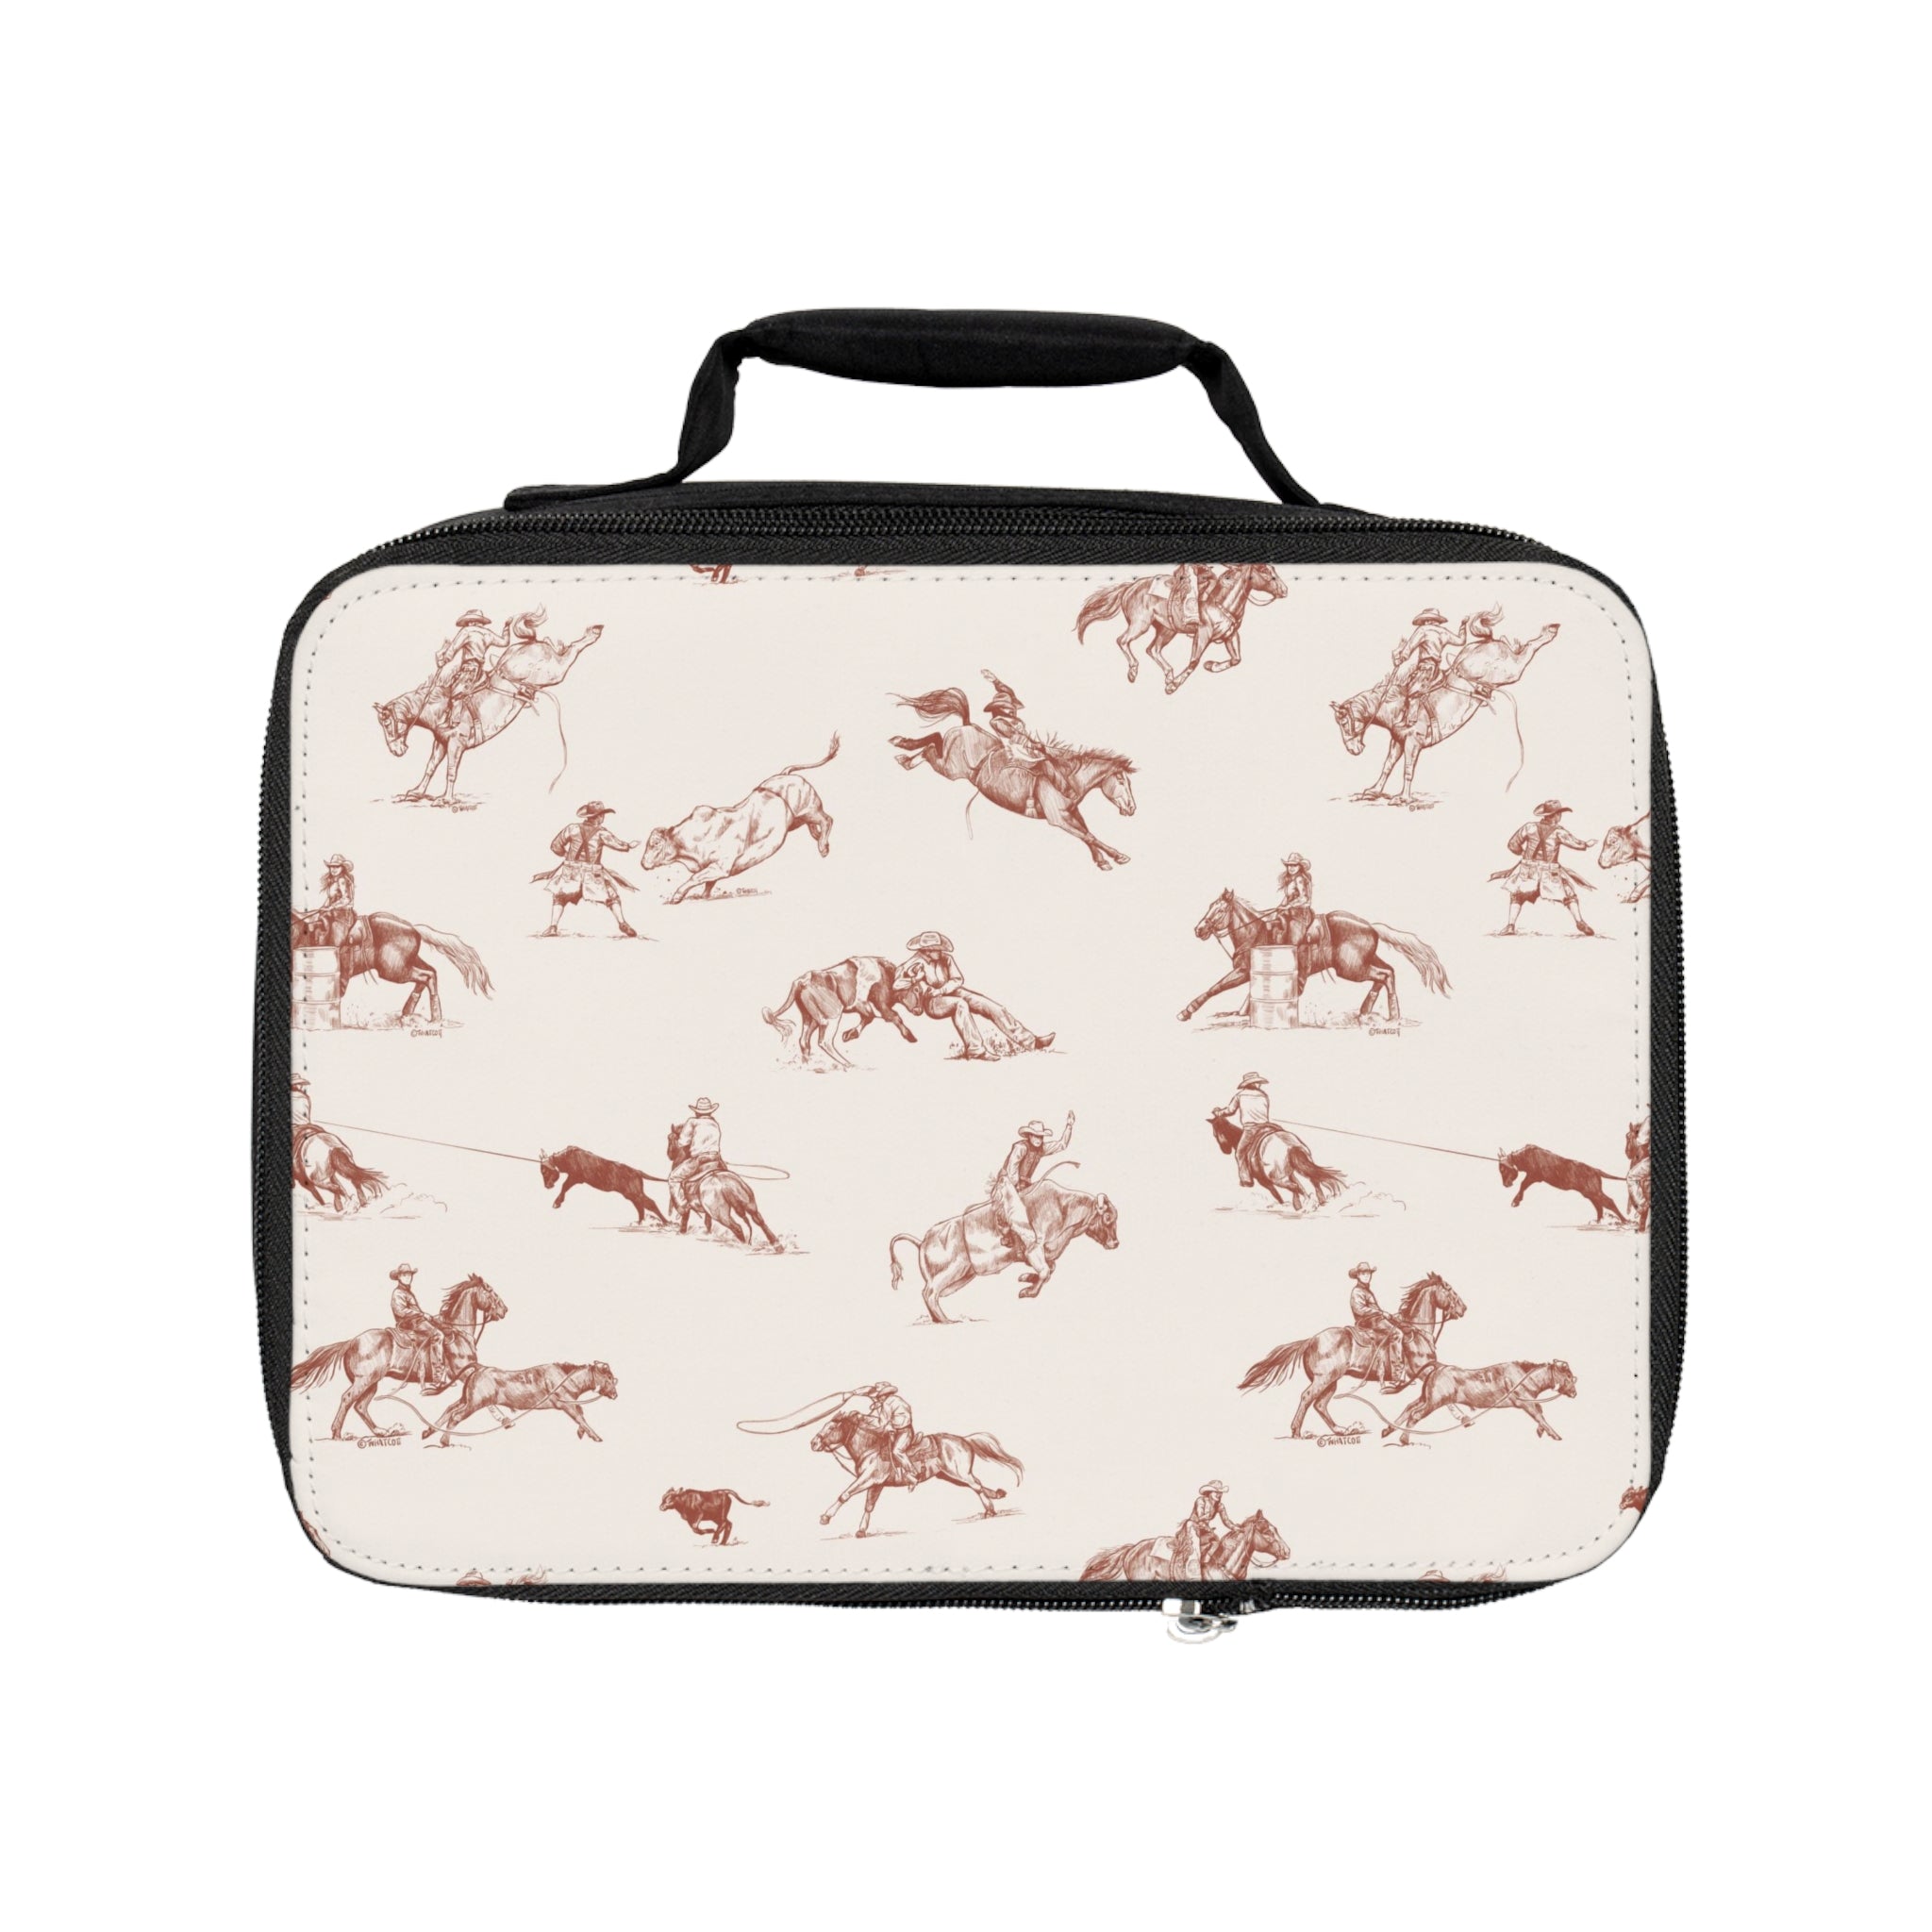 "Take Me To The Rodeo" Lunch Box in Cream